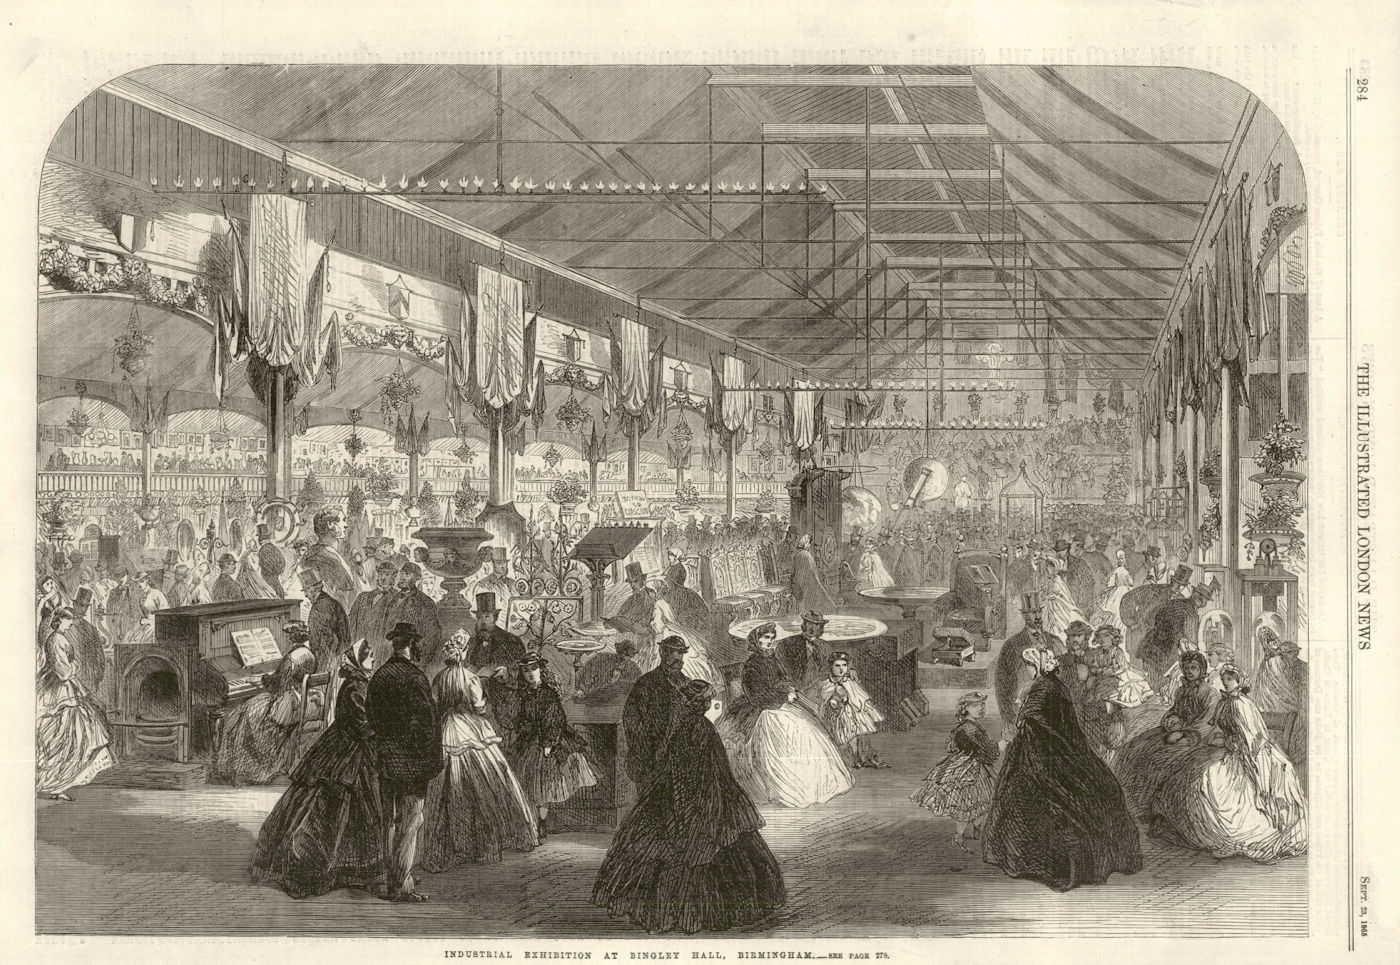 Associate Product Industrial Exhibition at Bingley Hall, Birmingham 1865 antique ILN full page